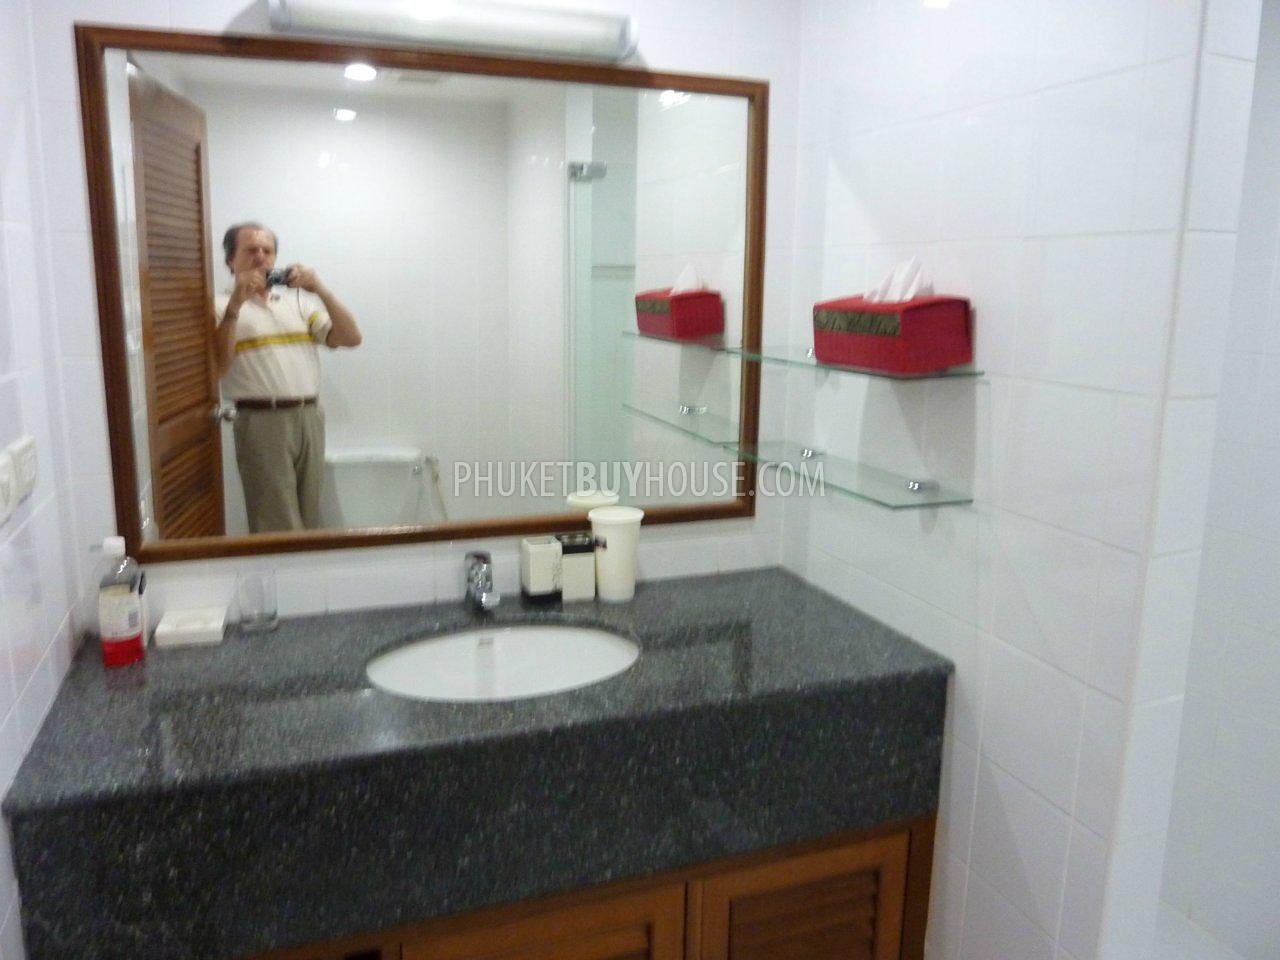 NAI2456: Freehold: Very nice 2 bedr. apartment (top floor), fully furnished, near beautiful Nai Harn Beach. Photo #17